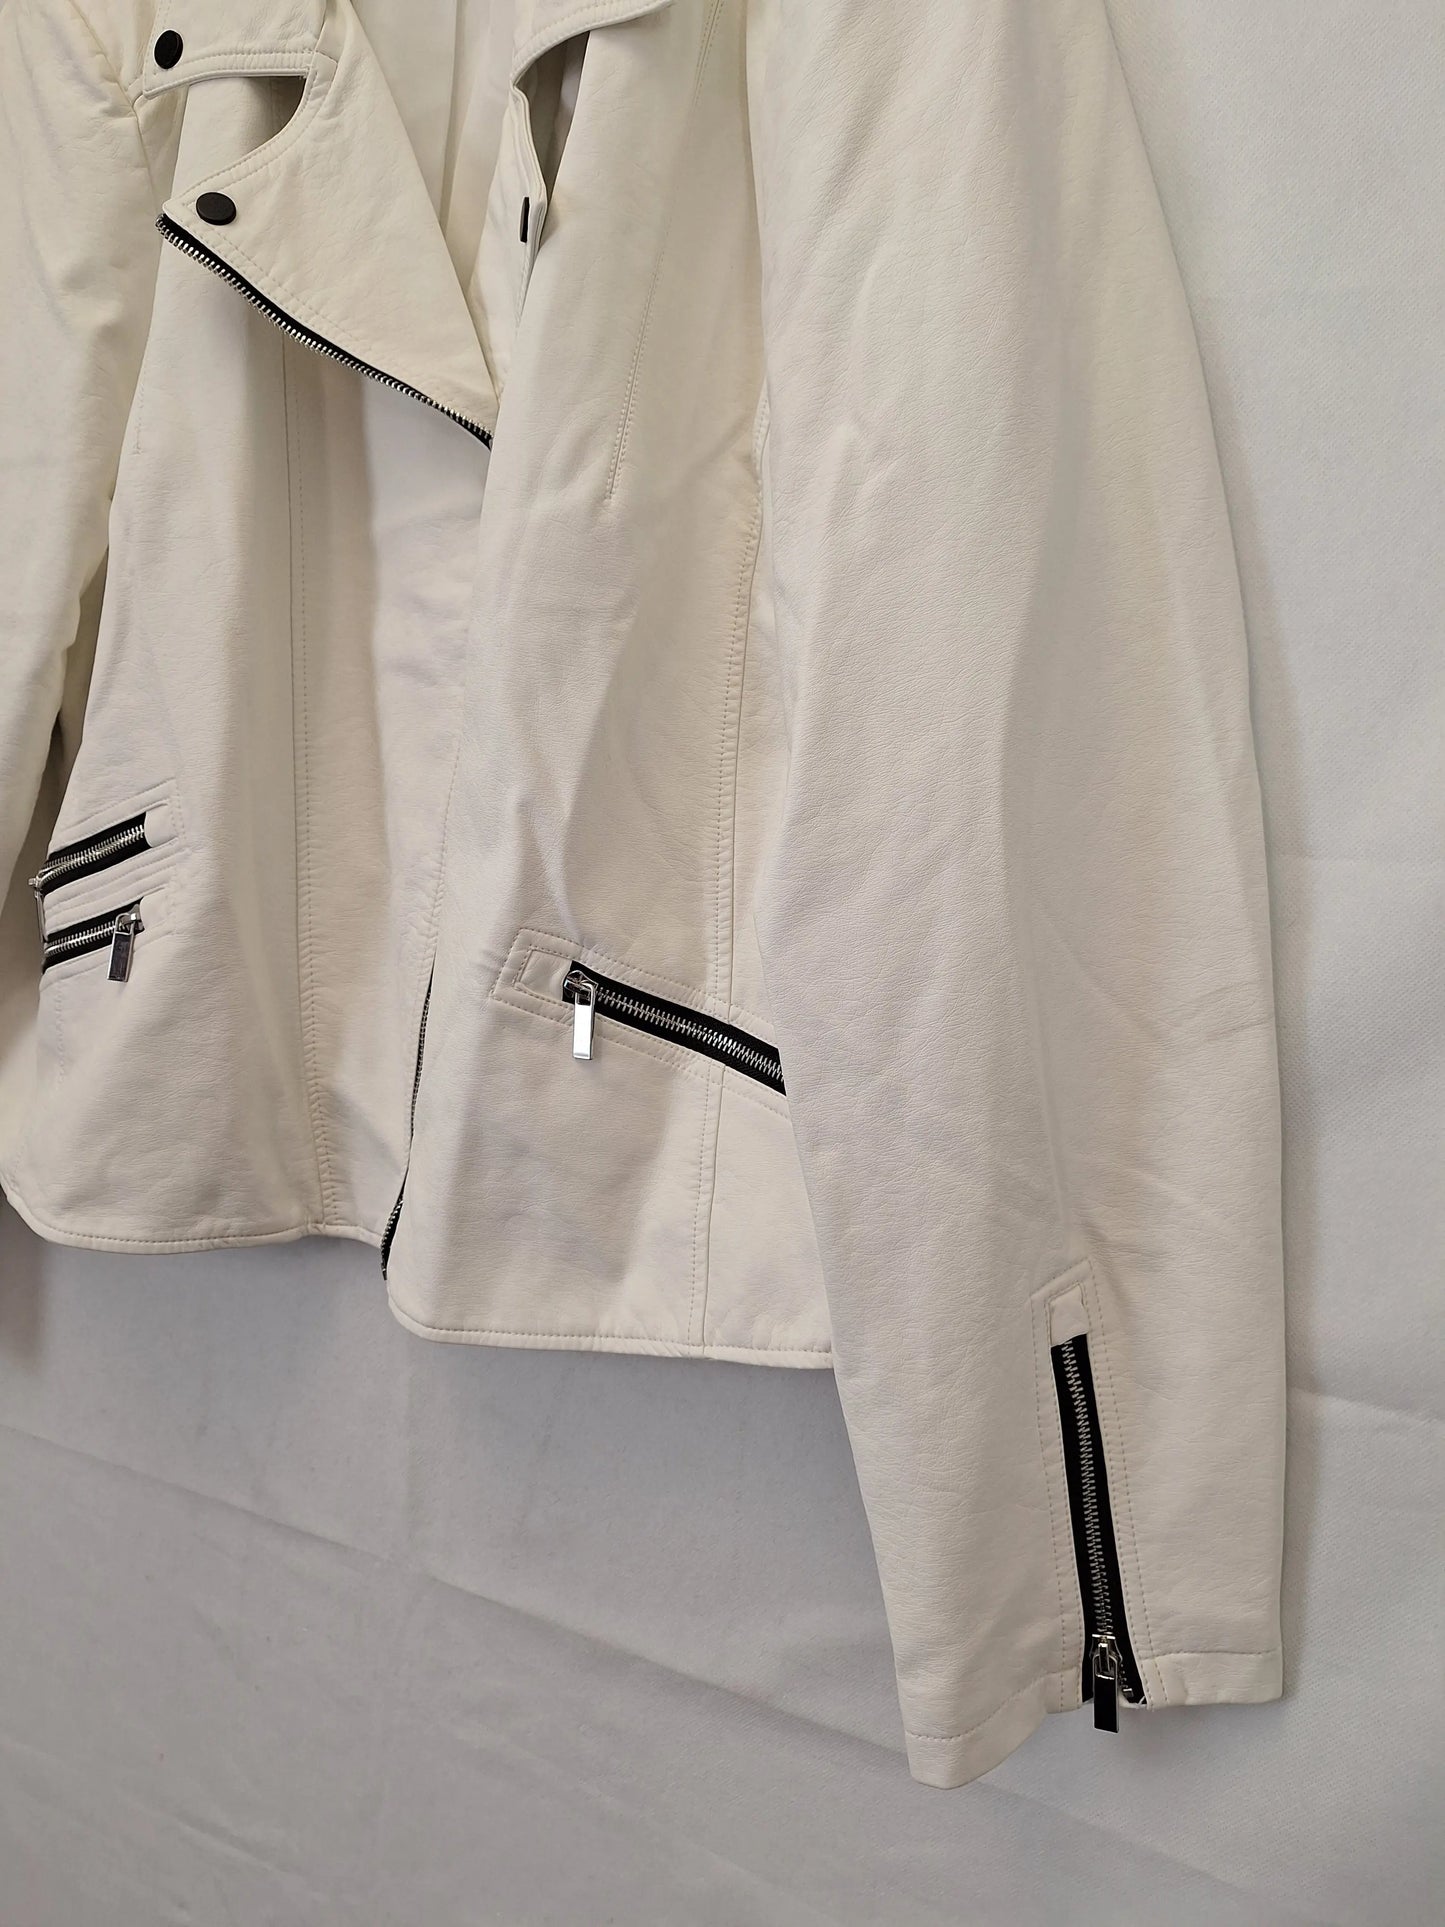 City Chic White Biker Jacket Size XL Plus by SwapUp-Online Second Hand Store-Online Thrift Store